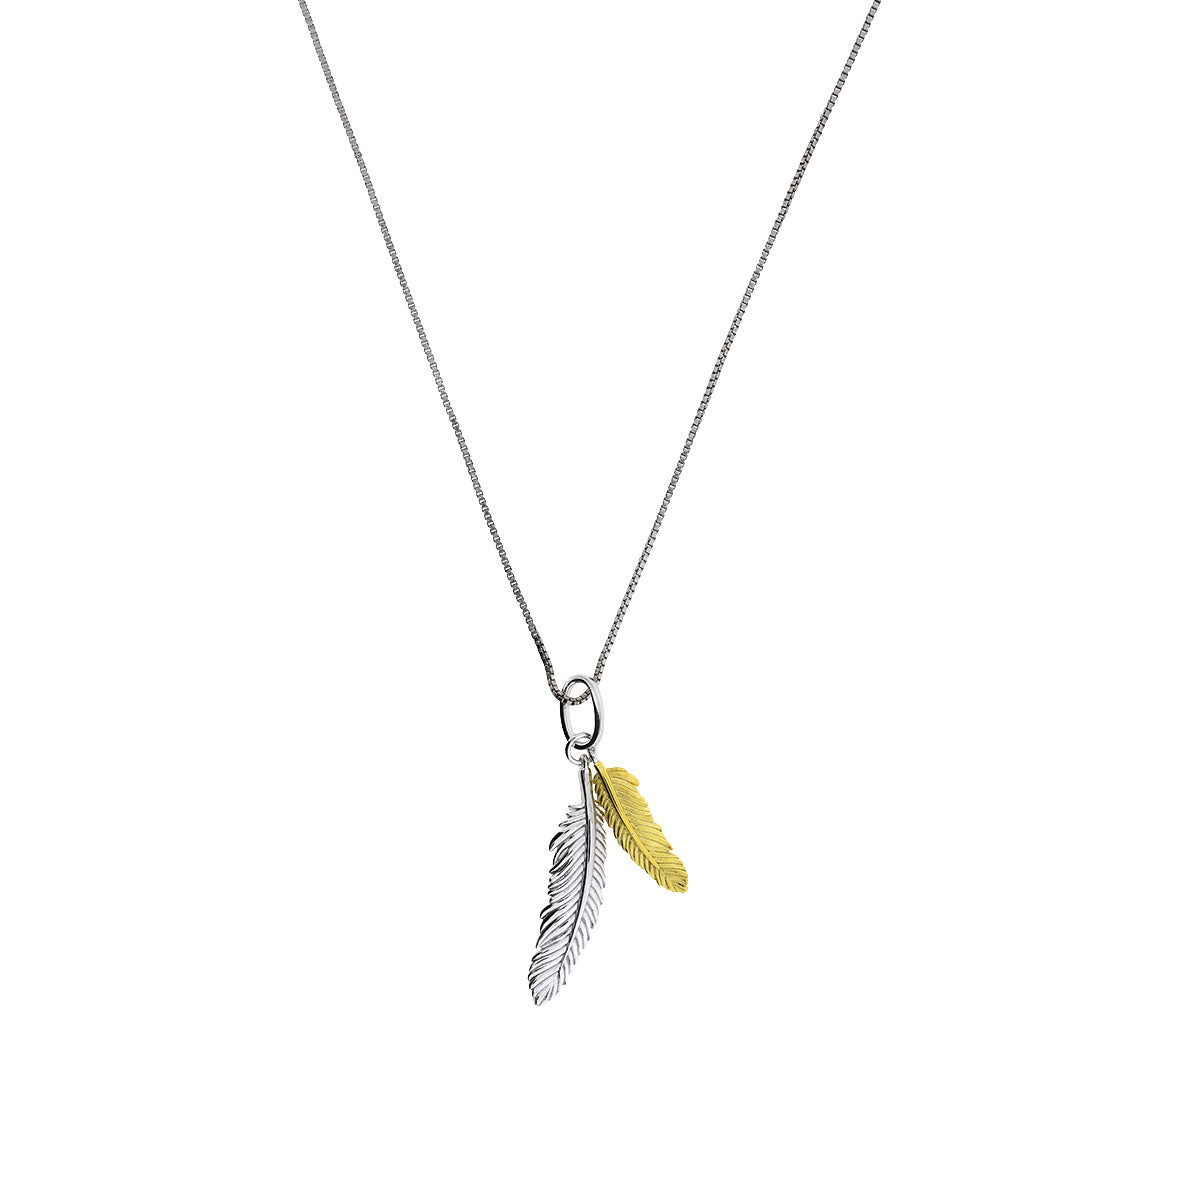 Curving Double Feather Pendant - Silver & Yellow Gold Vermeil